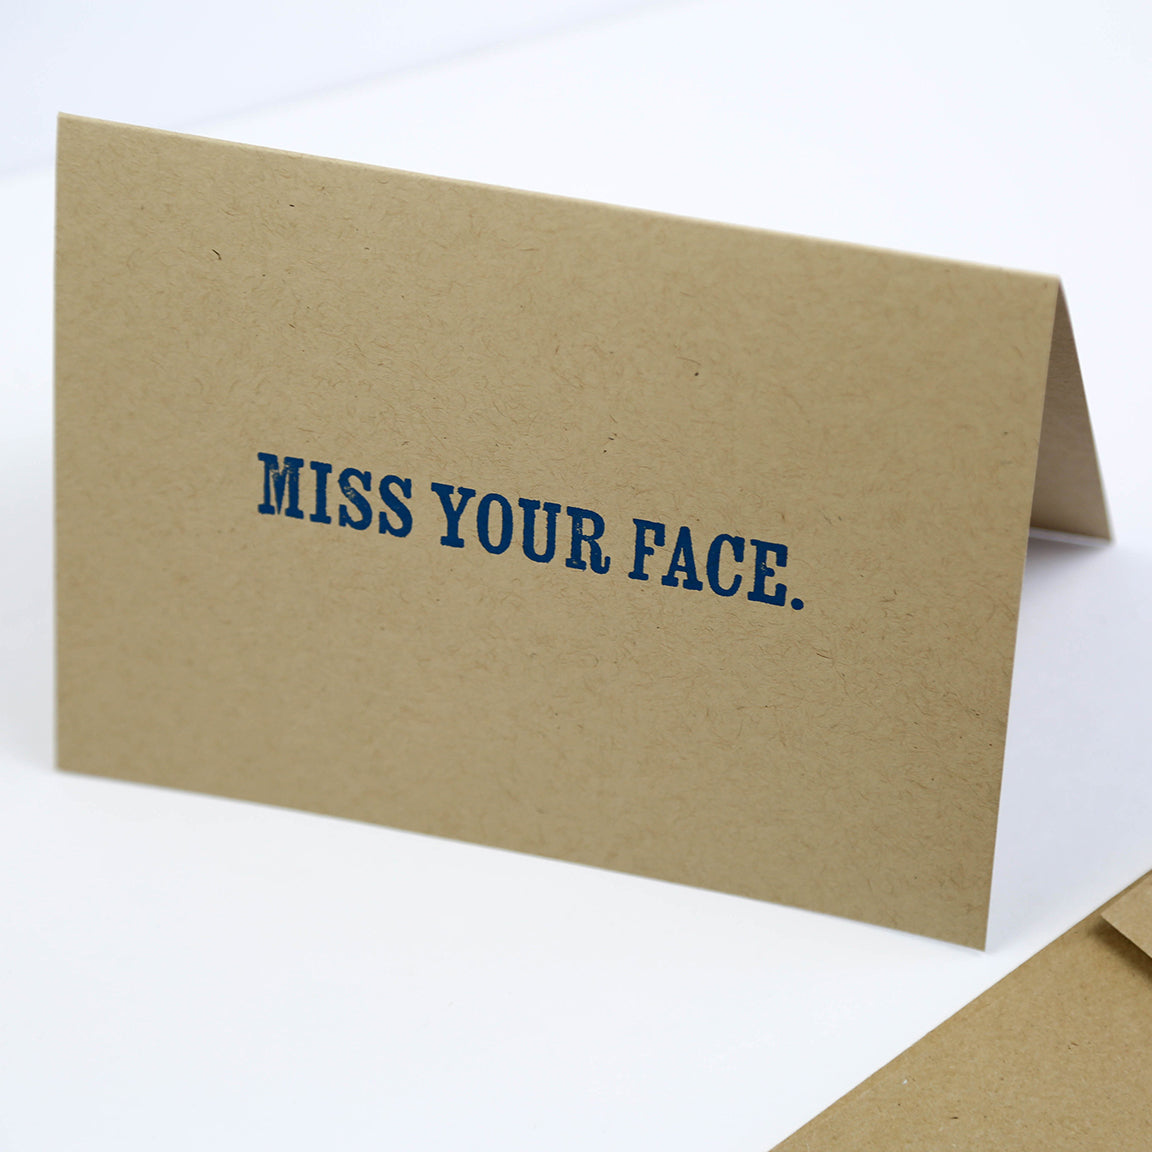 Miss your face - Greeting Card